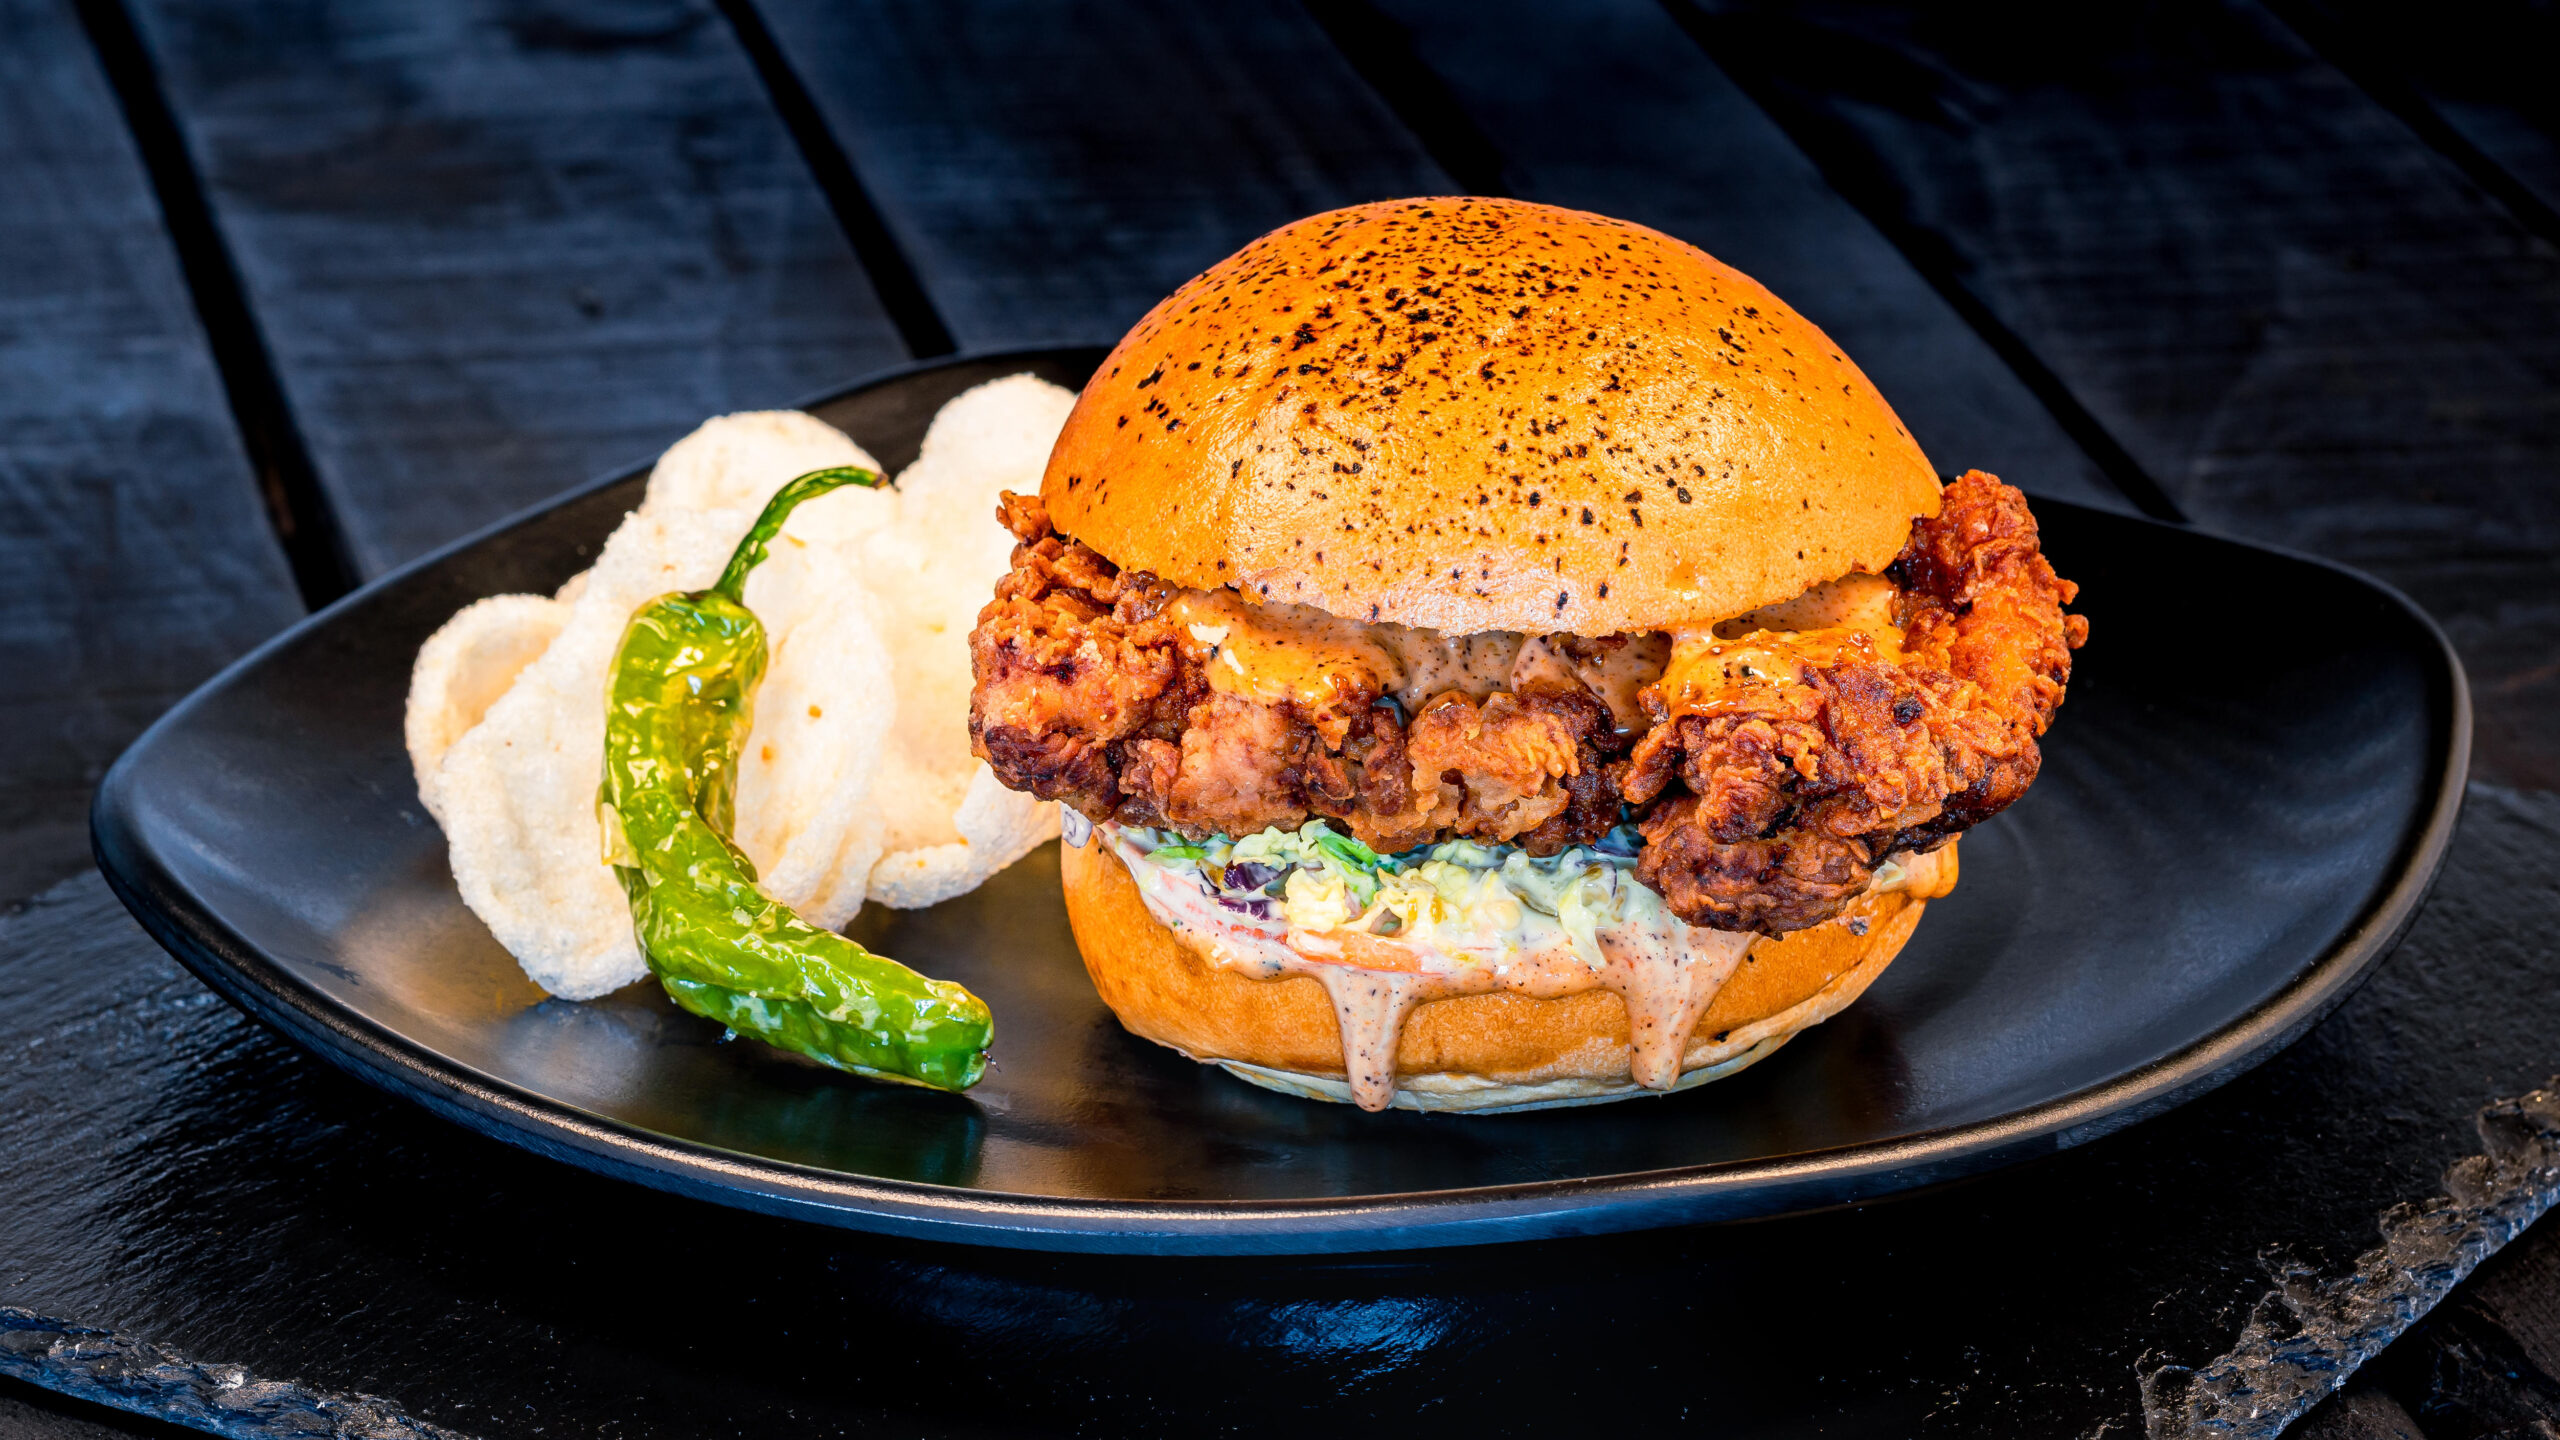 Karaage-inspired Crispy Chicken Sandwich (Lucky Fortune Cookery) – with slaw, and Togarashi mayonnaise on a potato bun served with garlic chips. Available beginning July 19, 2023. For more details, visit DisneyParksBlog.com. (David Nguyen/Disneyland Resort)